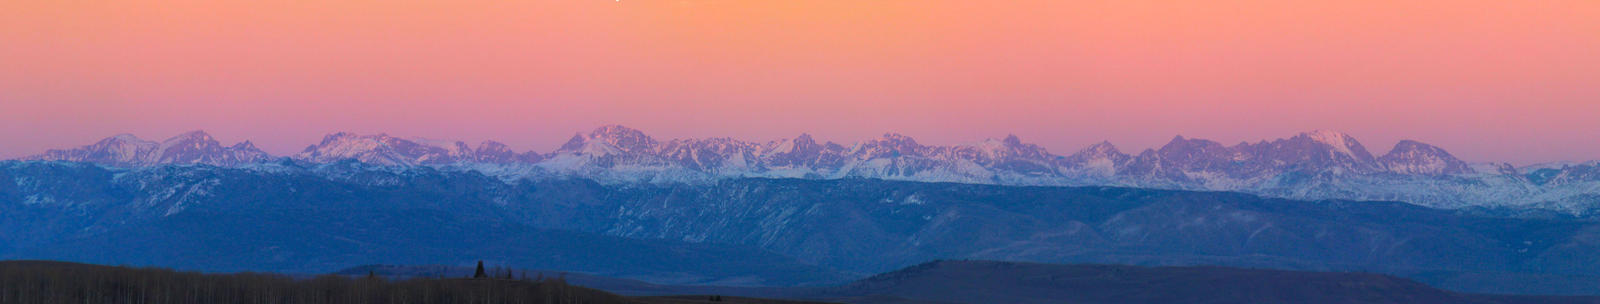 wind_river_range_from_the_cabin_by_halcyon1990-d6sbv93.jpg